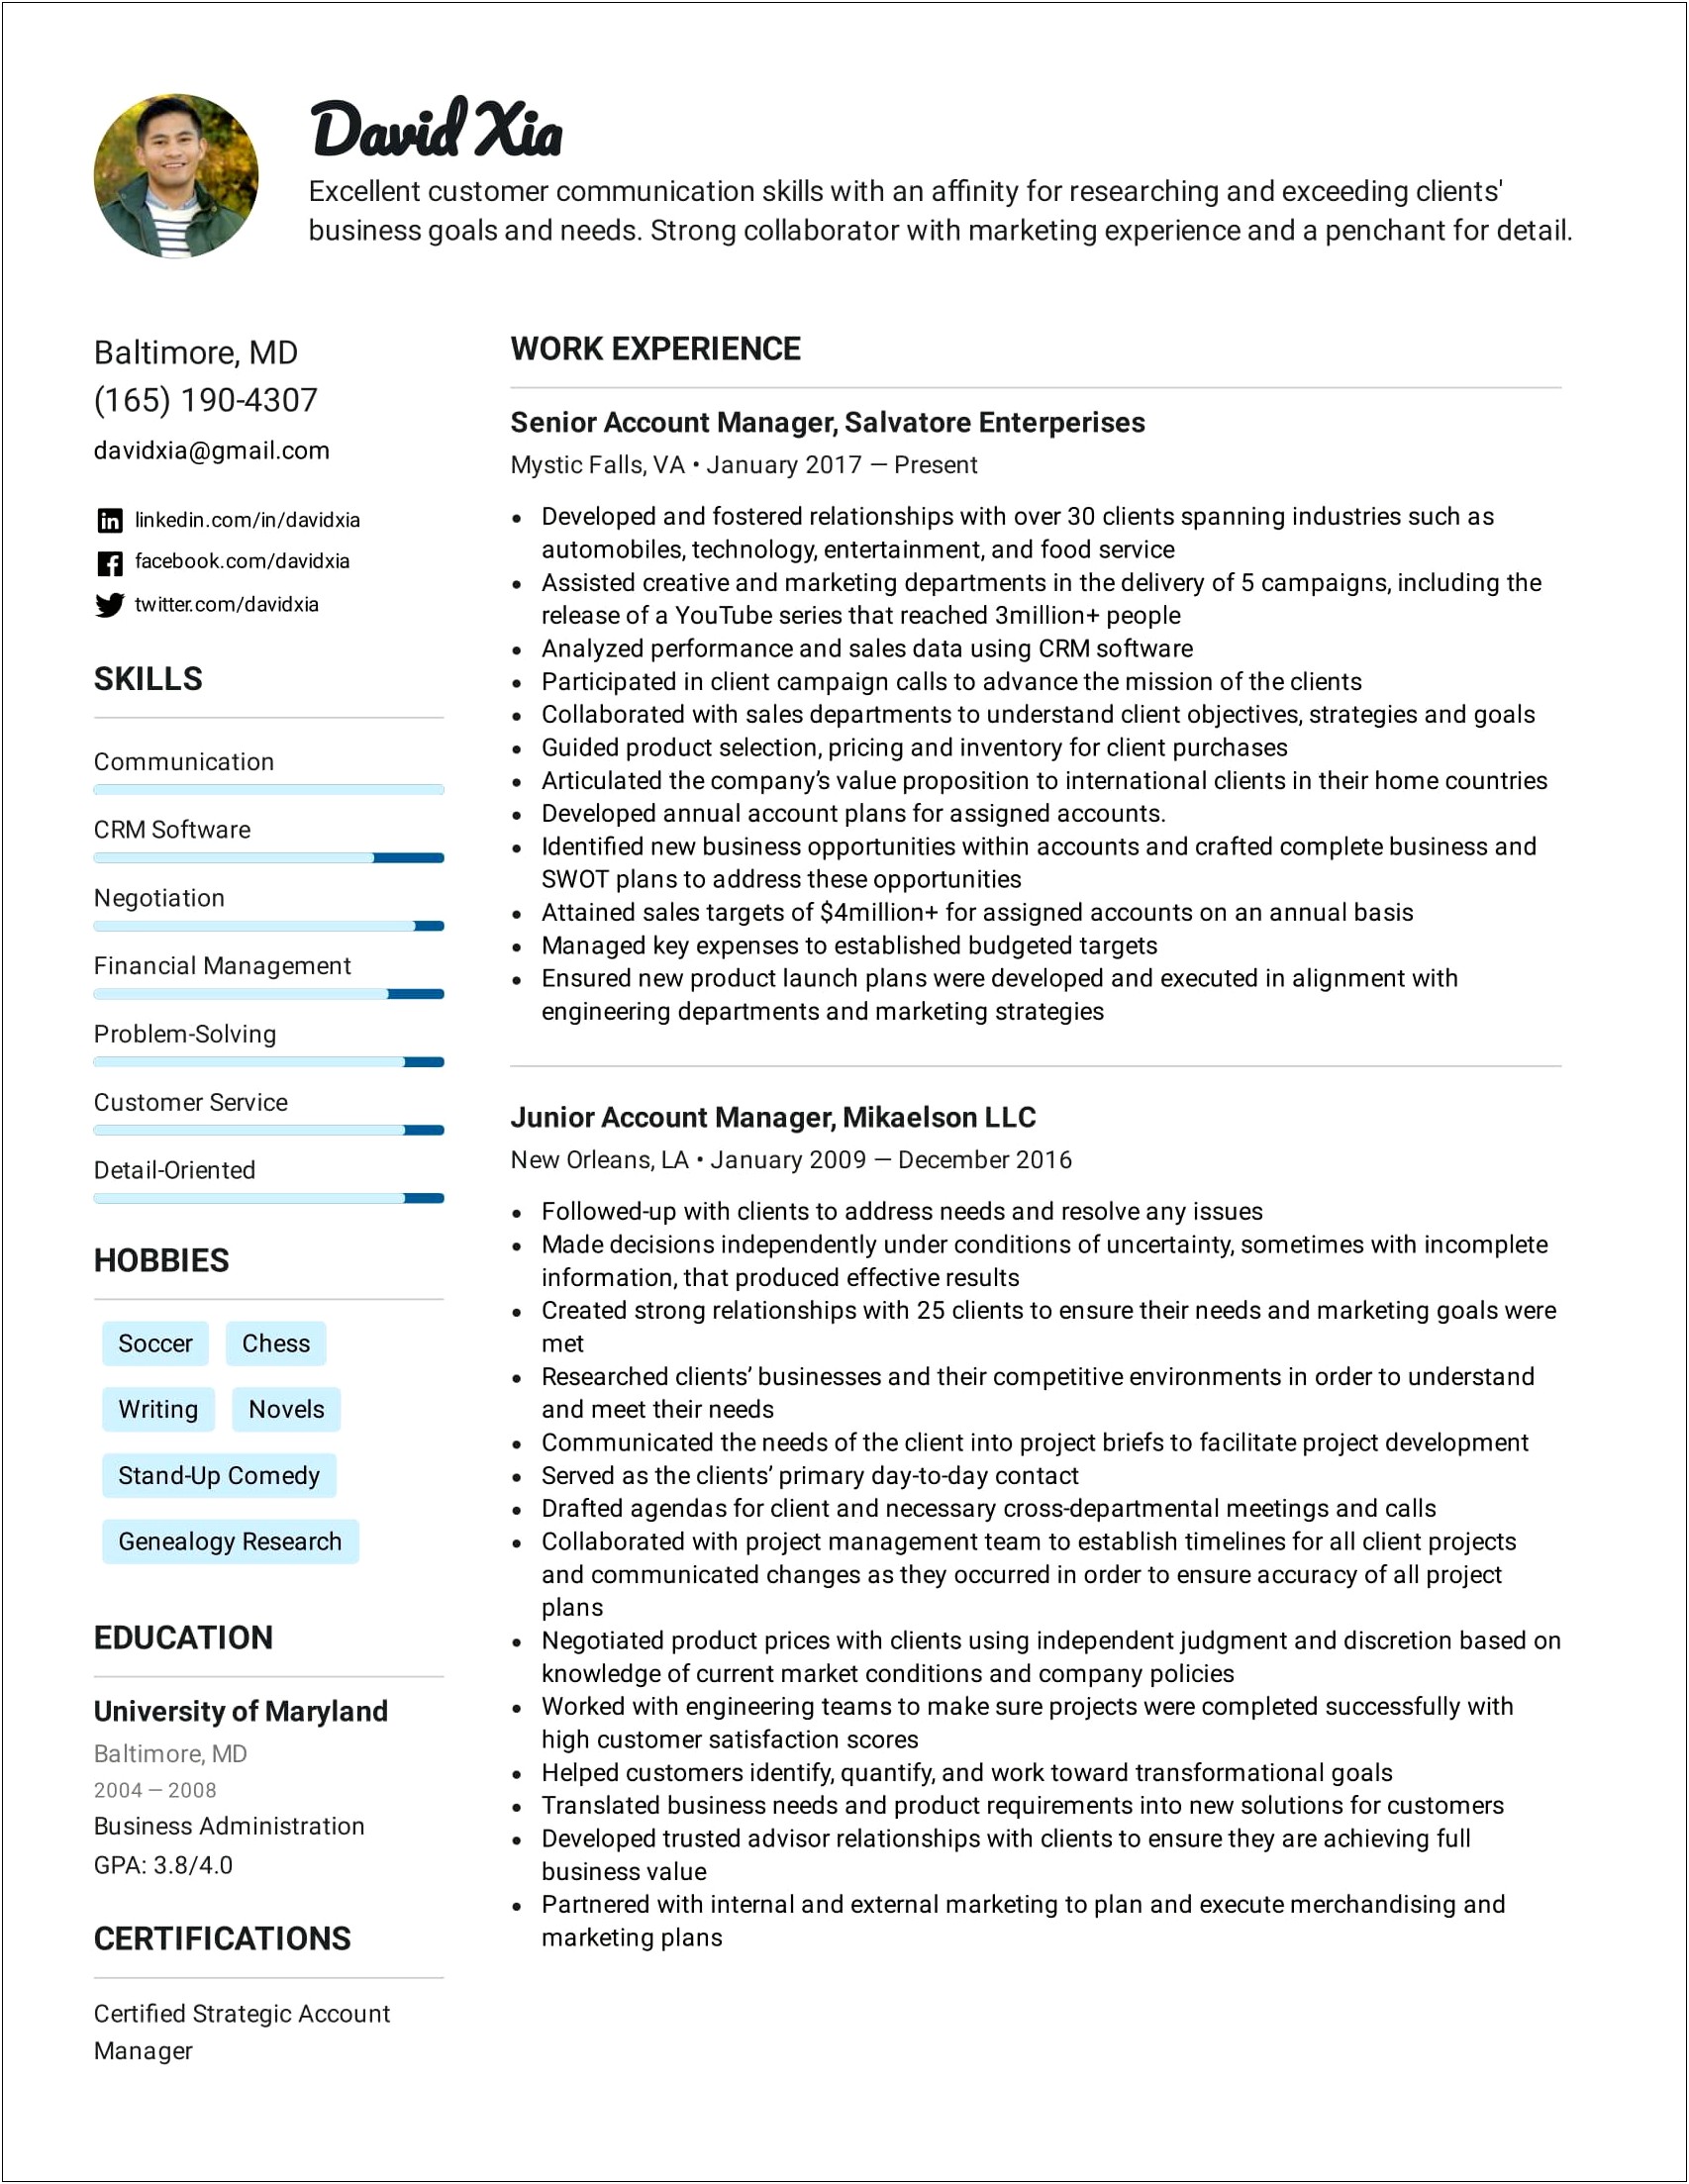 Easy Templates To Make Your Own Resume